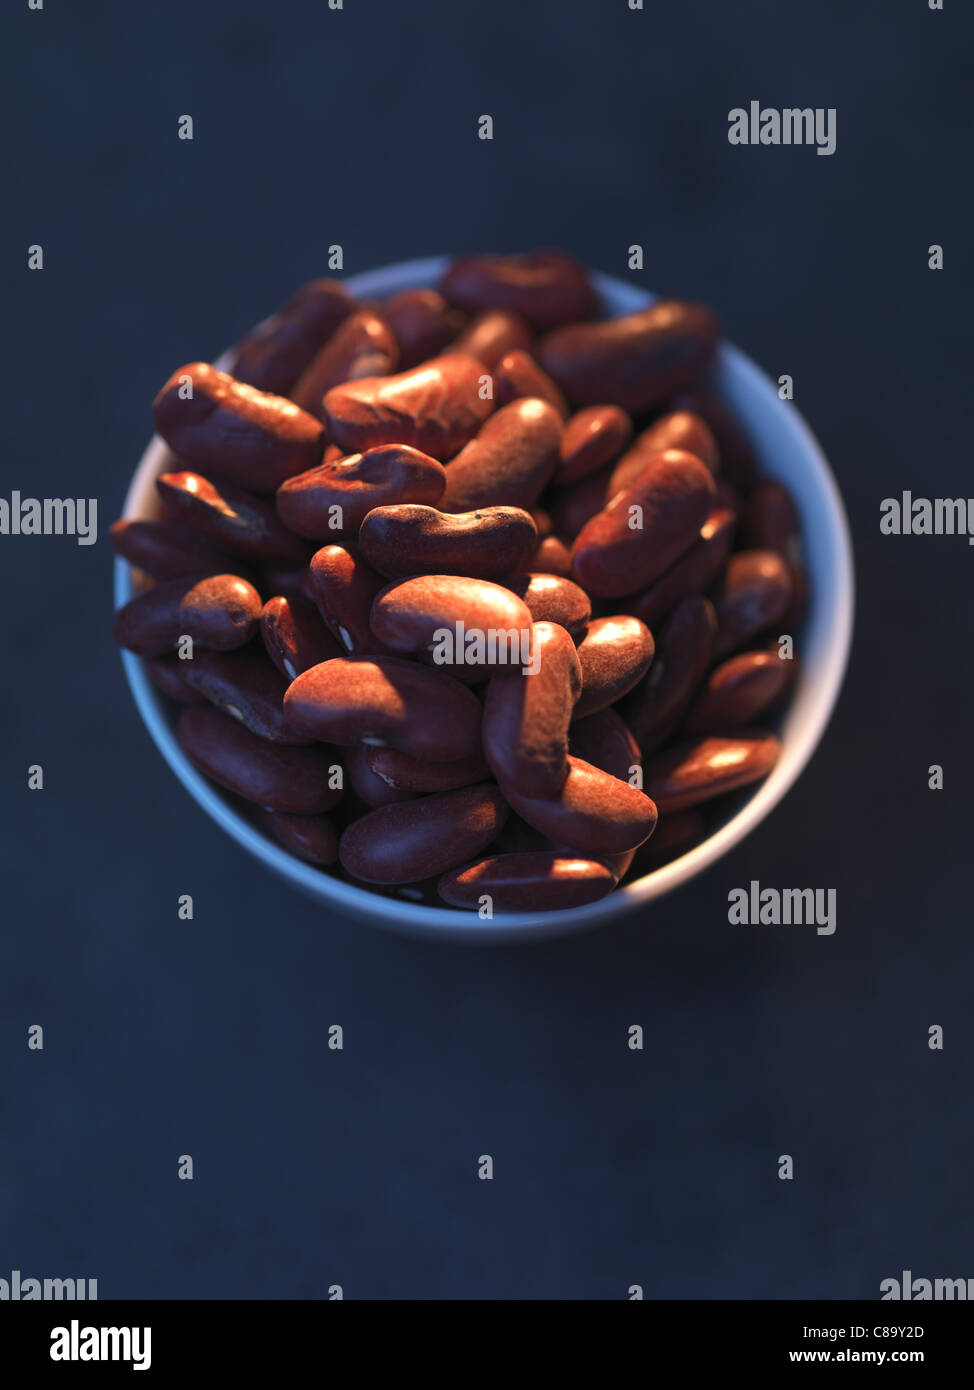 Red kidney beans Stock Photo